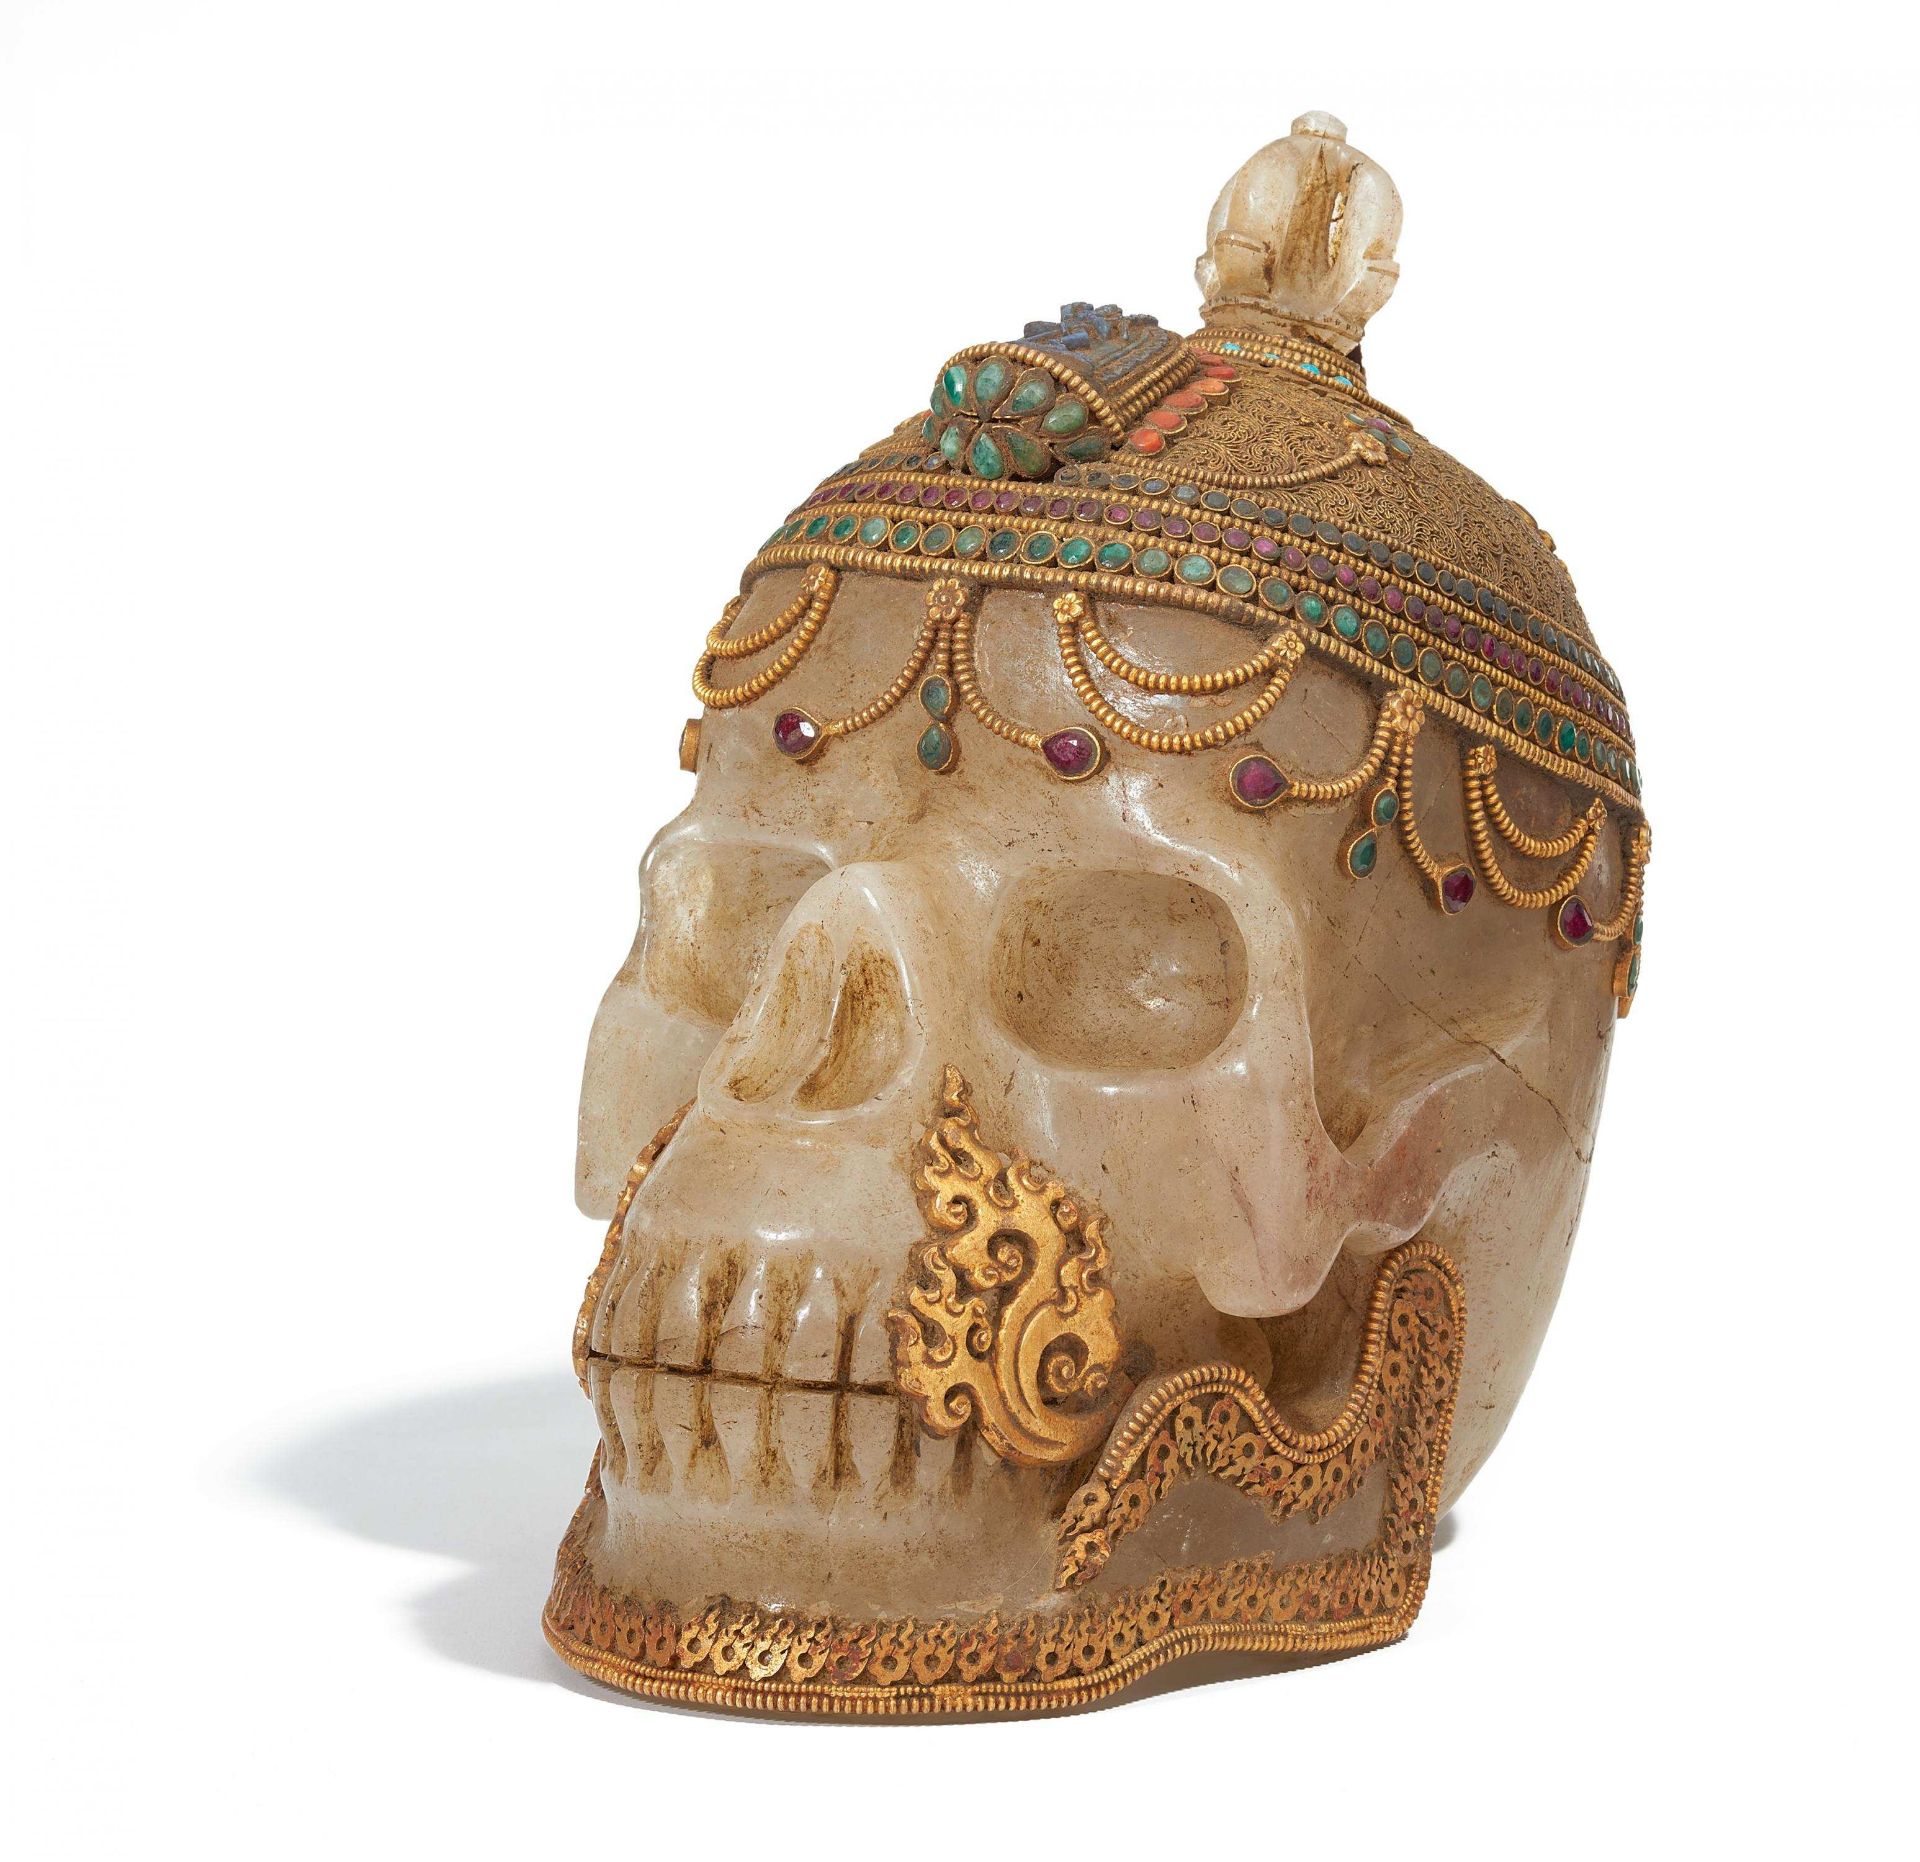 CHRYSTAL SKULL. Tibet. Probably 1.H. 19.Jh. Crystal carved and with metal mounting adorned with